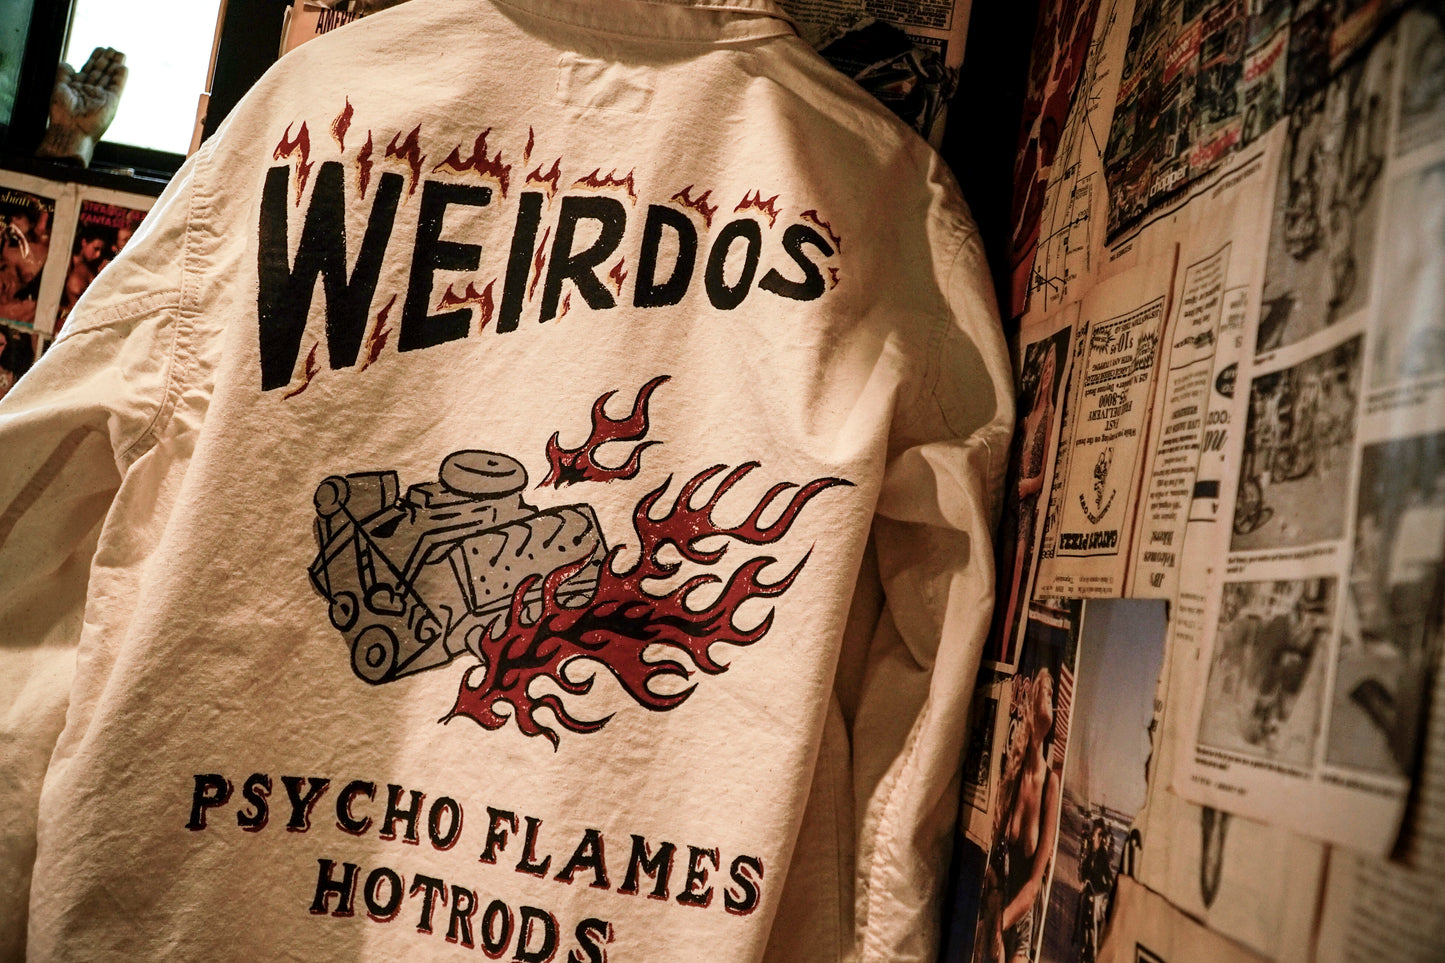 PSYCHO FLAMES - COVERALL / WRD-22-AW-13